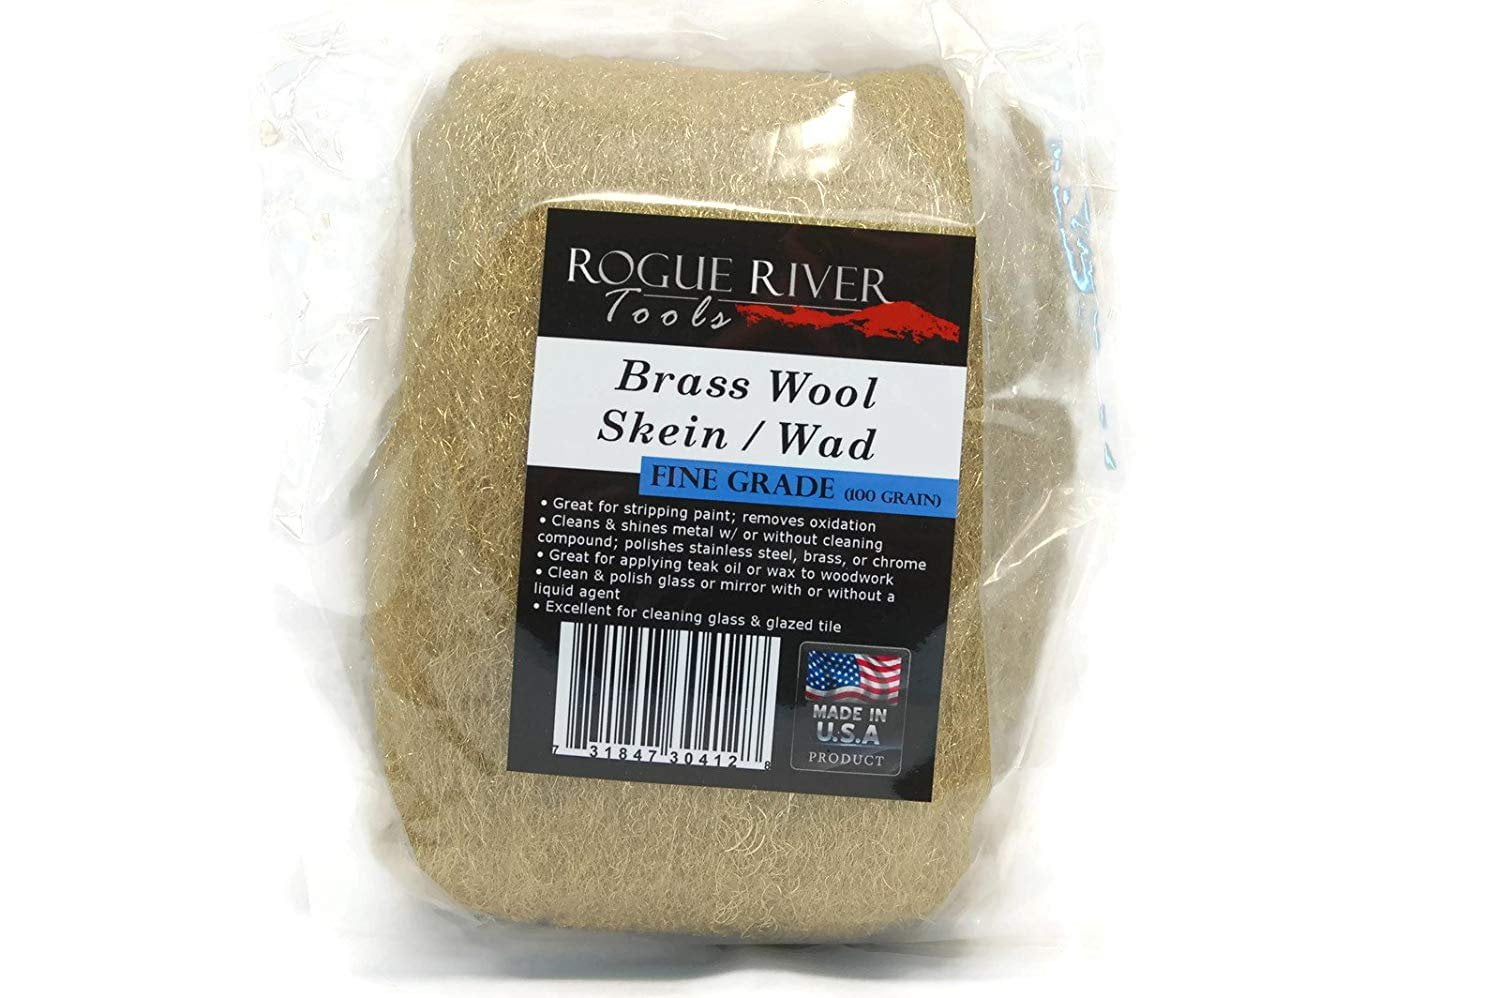 Brass Wool 3.5 Oz Skein/Pad/Wad -by Rogue River Tools. FINE grade -Made in  USA, Pure Brass 